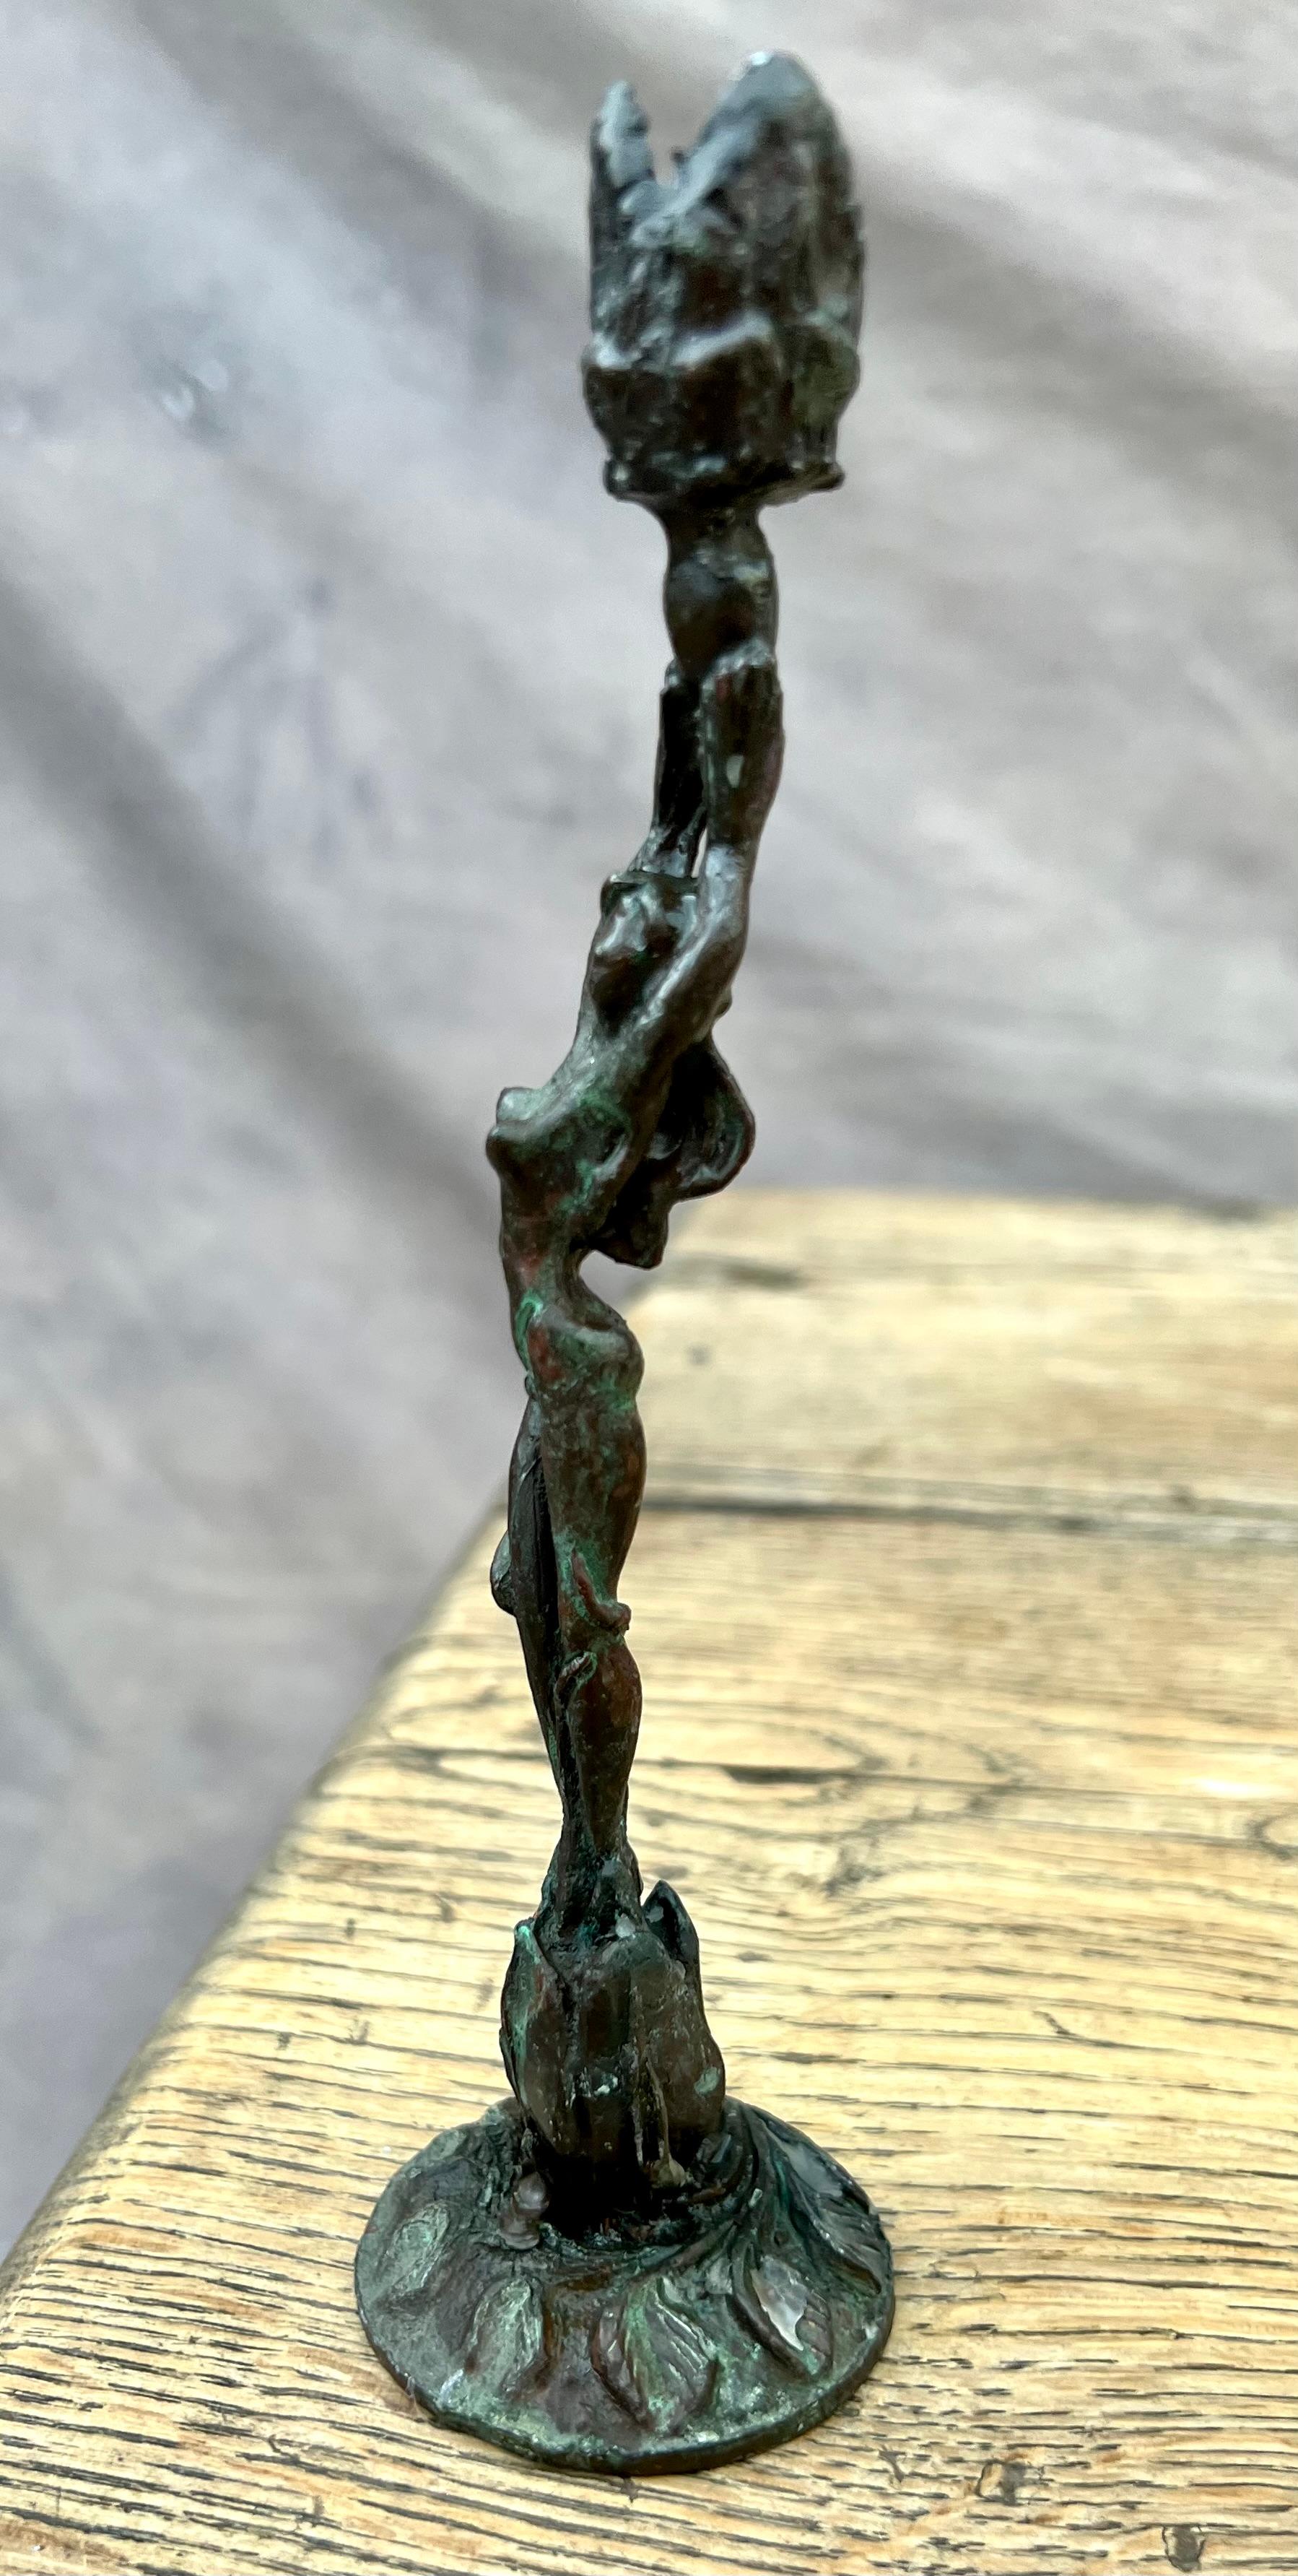 Expressive female figurine candlestick holder. 

The perfect table accent for a cozy dinner party, or in community with other candlesticks. Or perhaps bring a bit of Venus candlelight energy to the bath. Gorgeous patination on this delicately